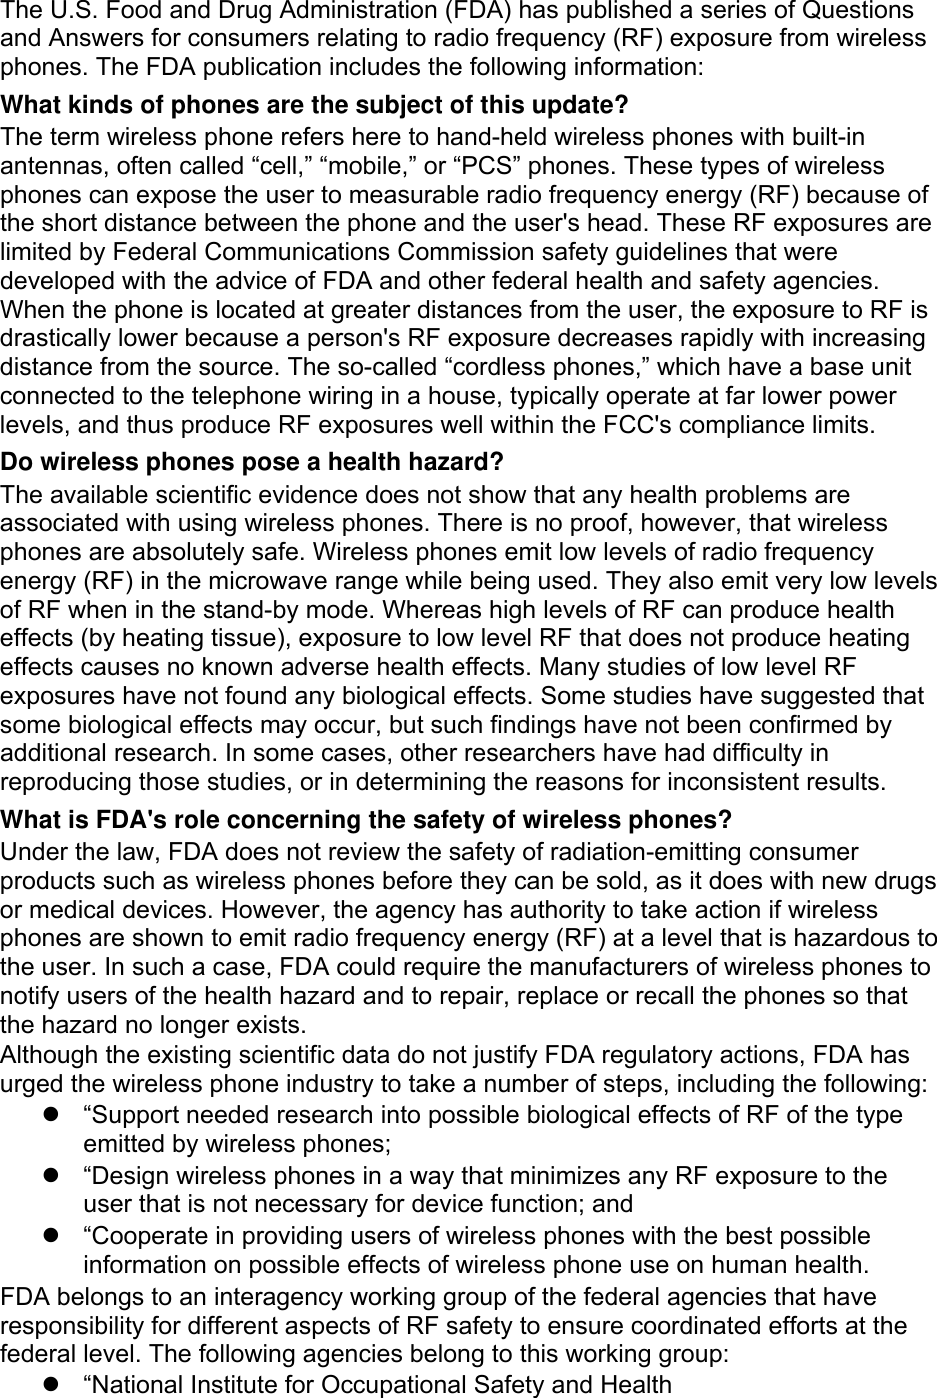 The U.S. Food and Drug Administration (FDA) has published a series of Questions and Answers for consumers relating to radio frequency (RF) exposure from wireless phones. The FDA publication includes the following information: What kinds of phones are the subject of this update? The term wireless phone refers here to hand-held wireless phones with built-in antennas, often called “cell,” “mobile,” or “PCS” phones. These types of wireless phones can expose the user to measurable radio frequency energy (RF) because of the short distance between the phone and the user&apos;s head. These RF exposures are limited by Federal Communications Commission safety guidelines that were developed with the advice of FDA and other federal health and safety agencies. When the phone is located at greater distances from the user, the exposure to RF is drastically lower because a person&apos;s RF exposure decreases rapidly with increasing distance from the source. The so-called “cordless phones,” which have a base unit connected to the telephone wiring in a house, typically operate at far lower power levels, and thus produce RF exposures well within the FCC&apos;s compliance limits. Do wireless phones pose a health hazard? The available scientific evidence does not show that any health problems are associated with using wireless phones. There is no proof, however, that wireless phones are absolutely safe. Wireless phones emit low levels of radio frequency energy (RF) in the microwave range while being used. They also emit very low levels of RF when in the stand-by mode. Whereas high levels of RF can produce health effects (by heating tissue), exposure to low level RF that does not produce heating effects causes no known adverse health effects. Many studies of low level RF exposures have not found any biological effects. Some studies have suggested that some biological effects may occur, but such findings have not been confirmed by additional research. In some cases, other researchers have had difficulty in reproducing those studies, or in determining the reasons for inconsistent results. What is FDA&apos;s role concerning the safety of wireless phones? Under the law, FDA does not review the safety of radiation-emitting consumer products such as wireless phones before they can be sold, as it does with new drugs or medical devices. However, the agency has authority to take action if wireless phones are shown to emit radio frequency energy (RF) at a level that is hazardous to the user. In such a case, FDA could require the manufacturers of wireless phones to notify users of the health hazard and to repair, replace or recall the phones so that the hazard no longer exists. Although the existing scientific data do not justify FDA regulatory actions, FDA has urged the wireless phone industry to take a number of steps, including the following: z  “Support needed research into possible biological effects of RF of the type emitted by wireless phones; z  “Design wireless phones in a way that minimizes any RF exposure to the user that is not necessary for device function; and z  “Cooperate in providing users of wireless phones with the best possible information on possible effects of wireless phone use on human health. FDA belongs to an interagency working group of the federal agencies that have responsibility for different aspects of RF safety to ensure coordinated efforts at the federal level. The following agencies belong to this working group: z  “National Institute for Occupational Safety and Health 